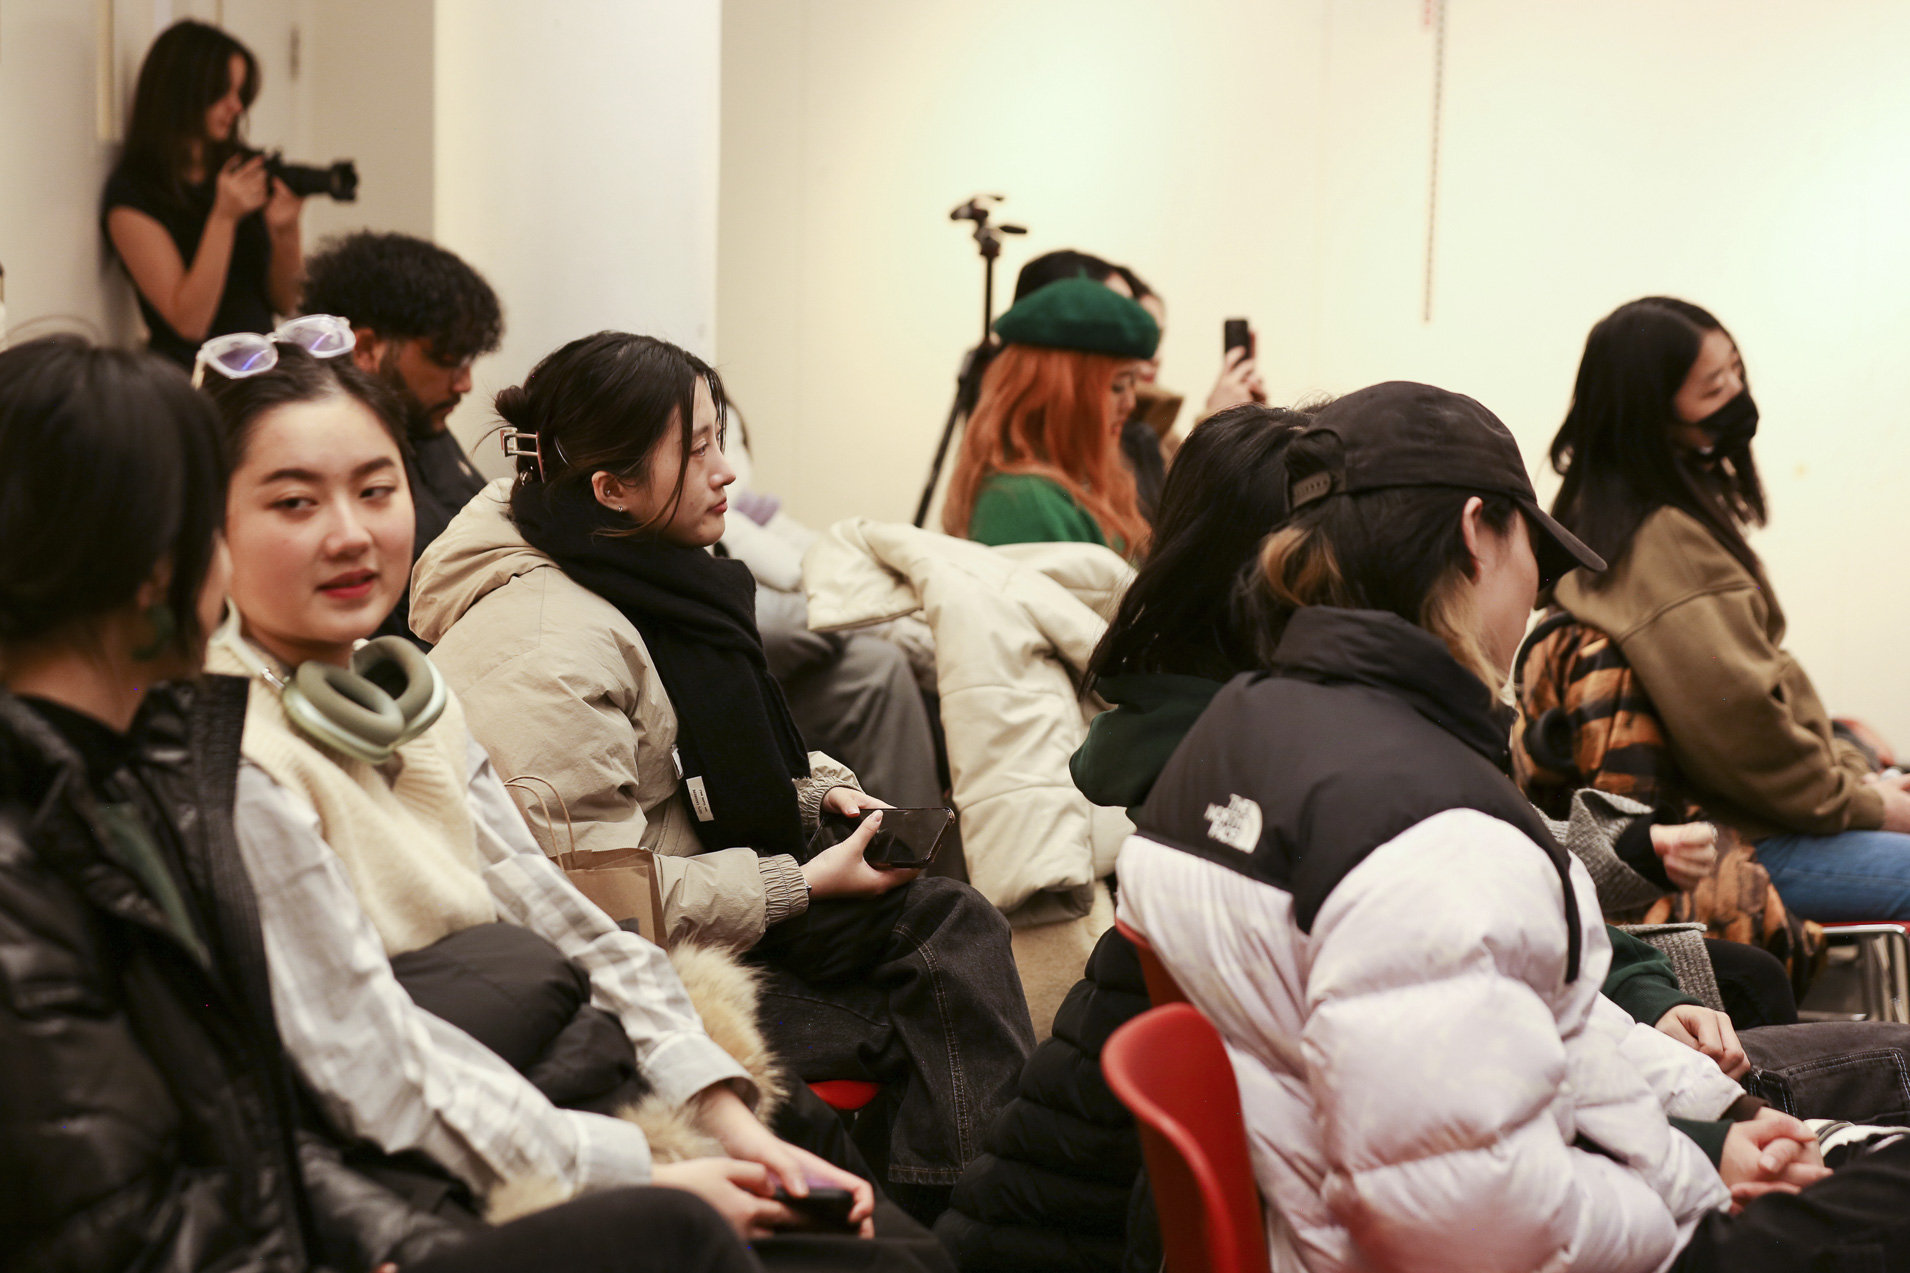 Seated students are in a room, some appear to be talking to another another, some do not appear to be talking while a person holds a camera near the edge of the frame